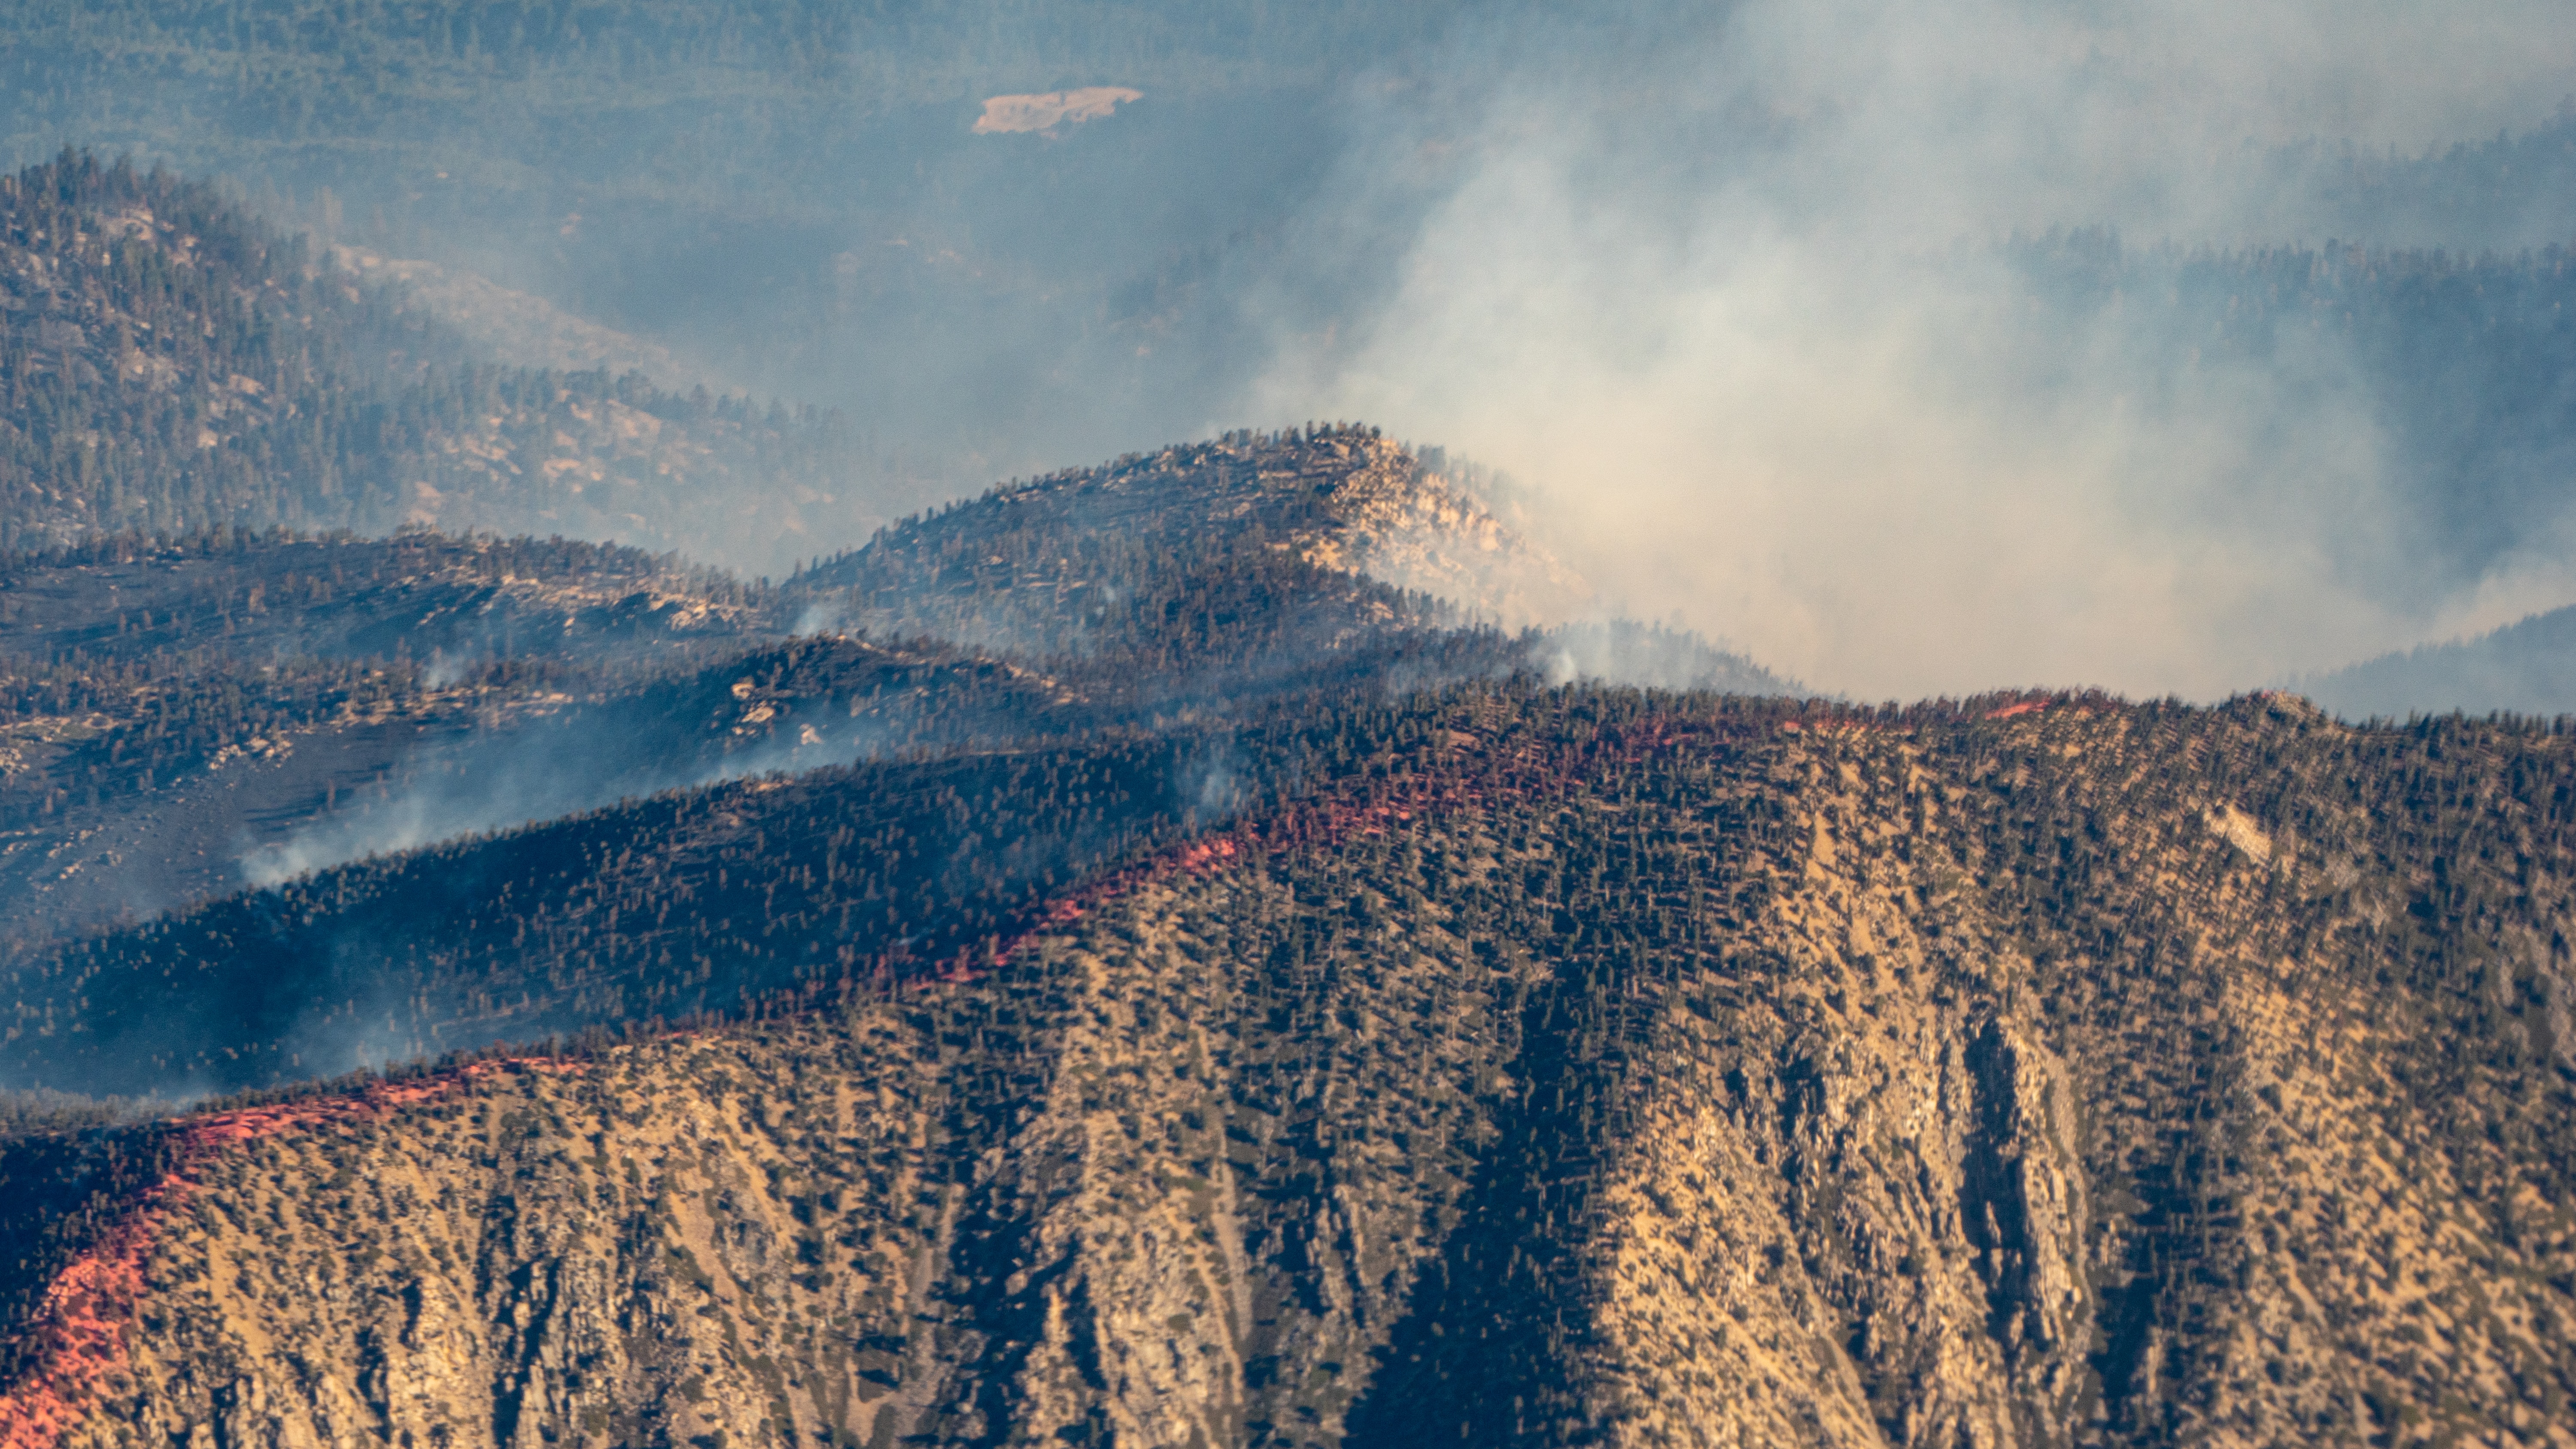 Wildfire smoke rises above dry and scorched mountaintops. Red fire retardant lines the ridgeline of the mountain in the foreground.